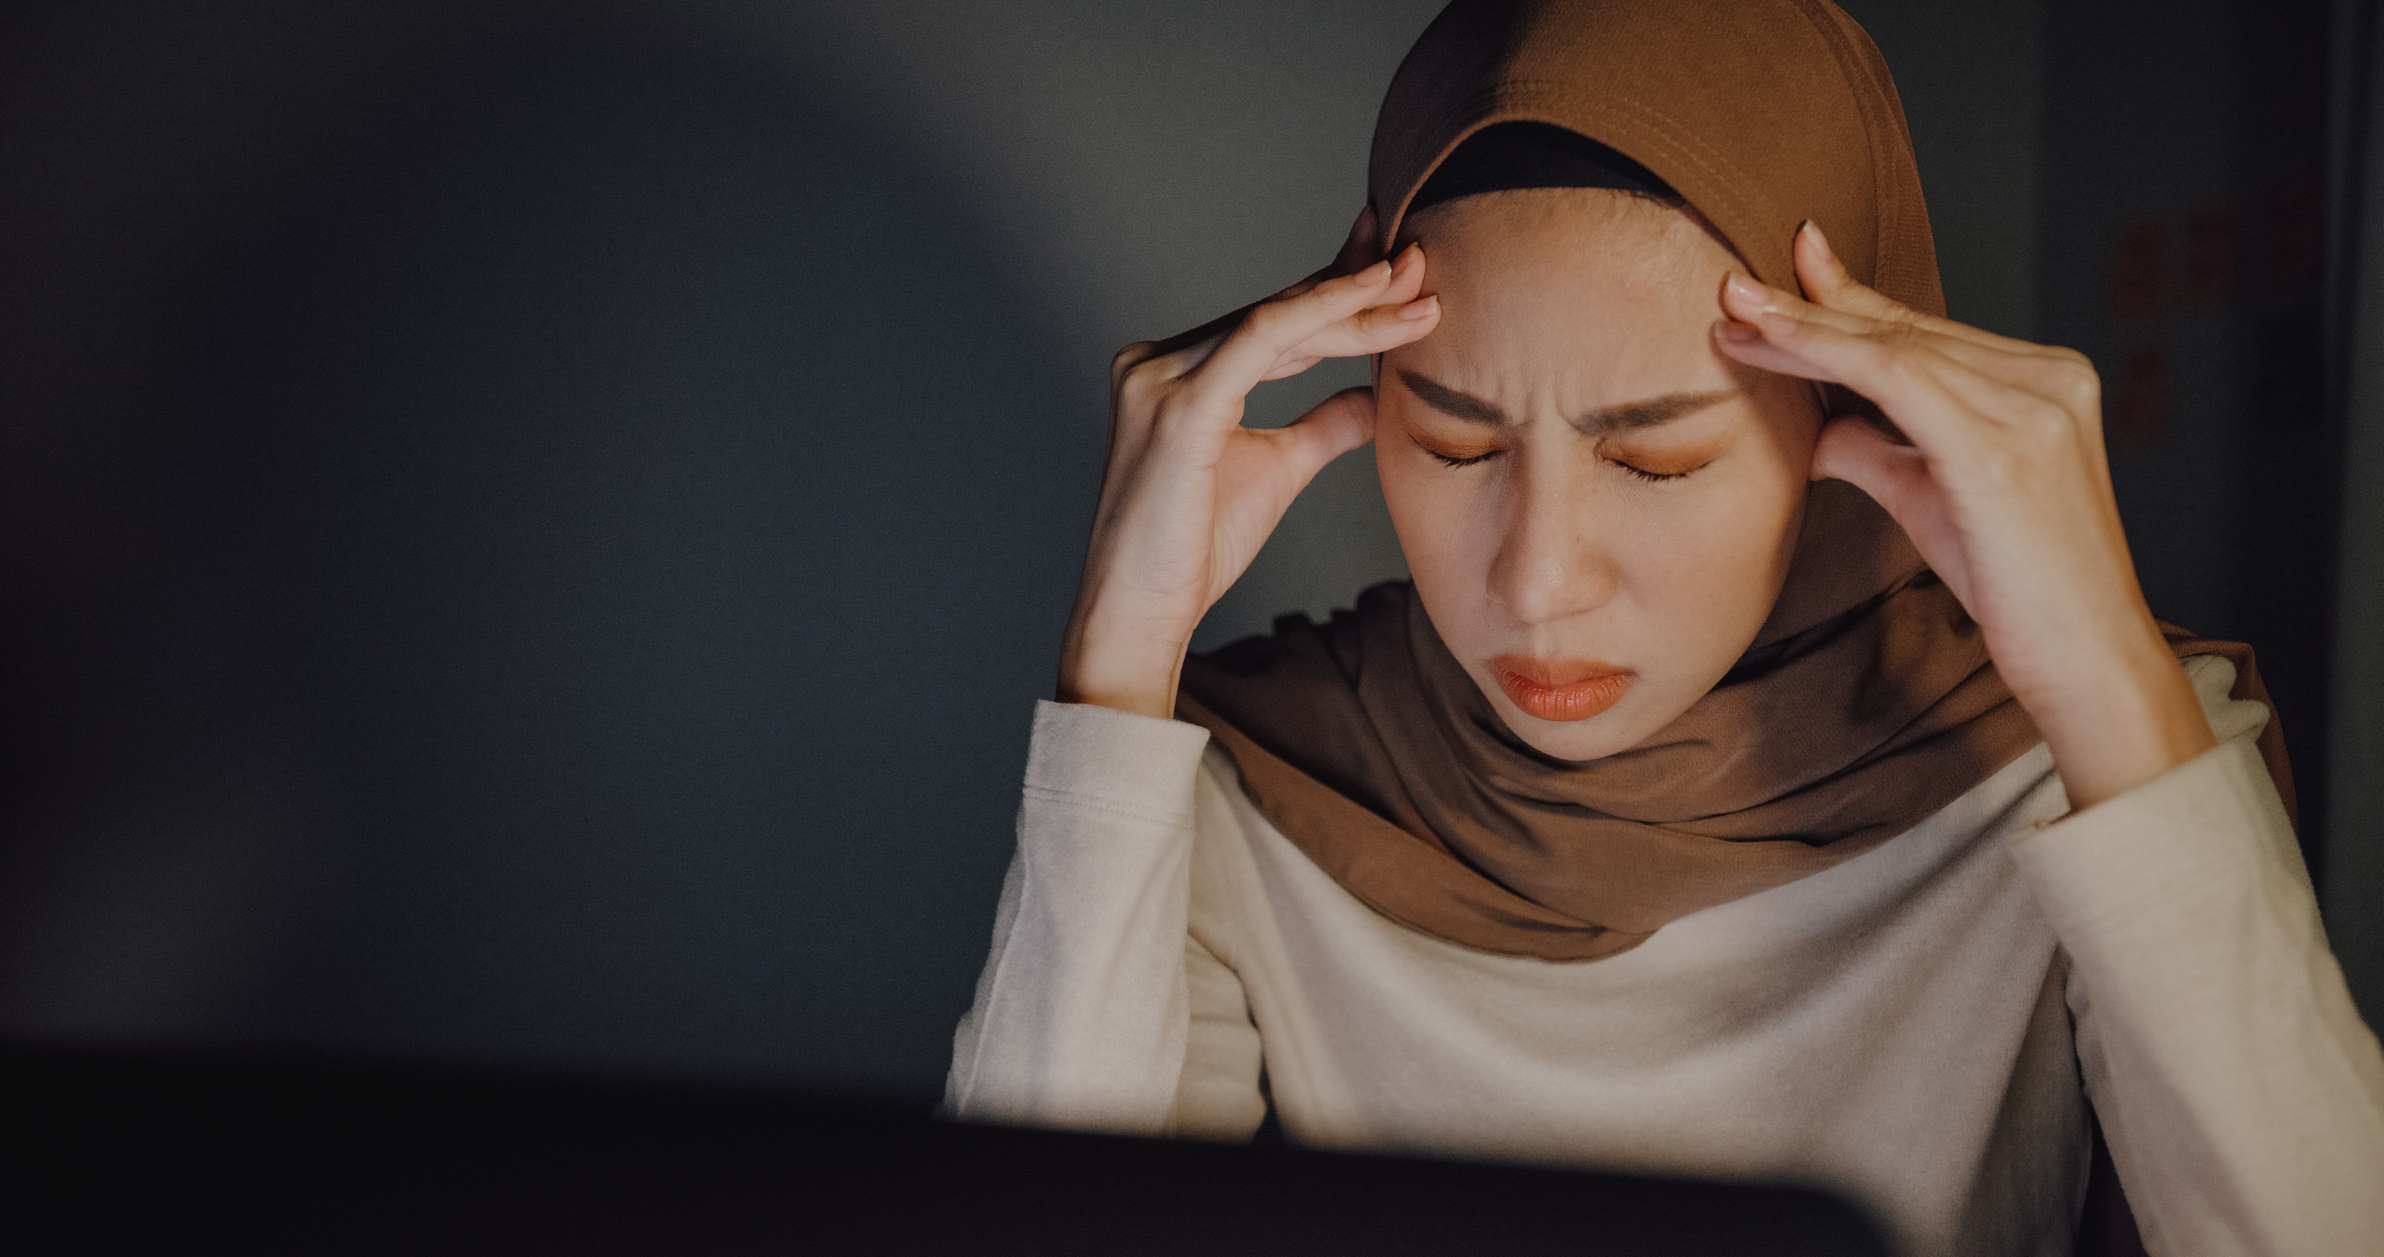 Woman in hijab appears stressed with hands on temples in front of a computer screen